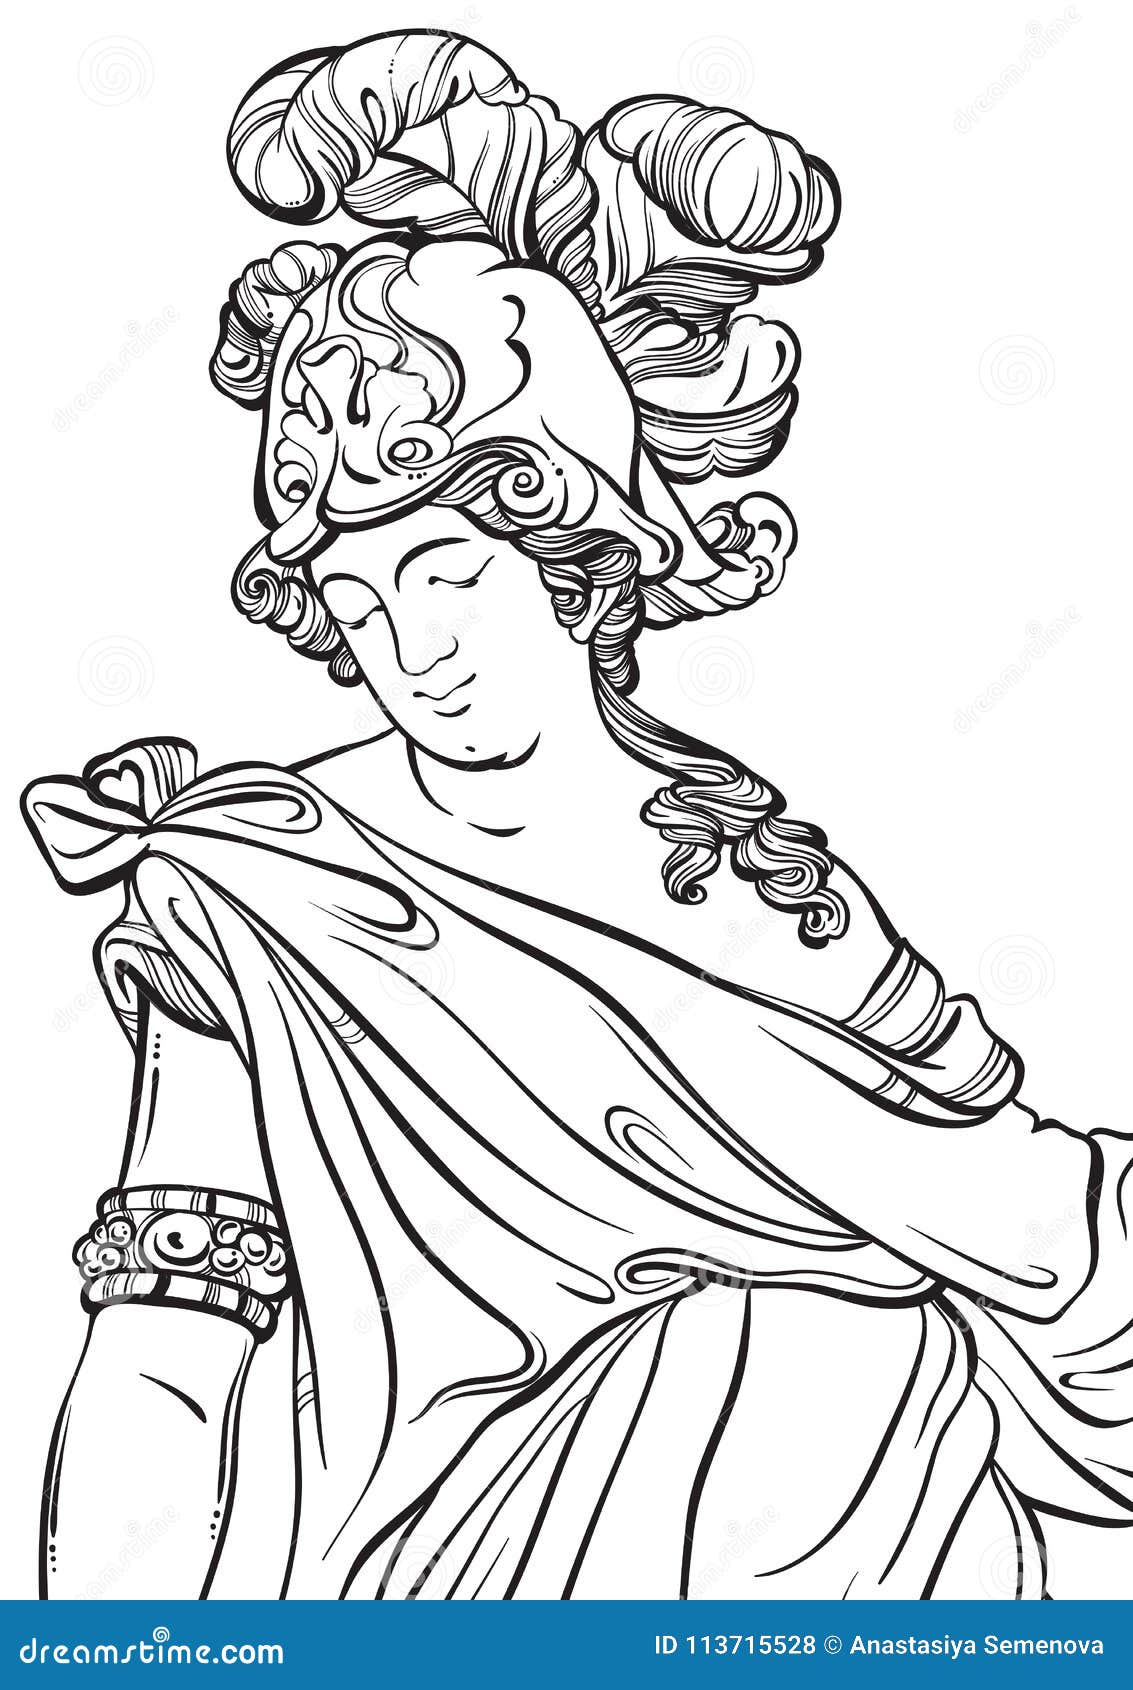 greek god in line style. great template for coloring book page. classicism. ancient greece. myths and legends.